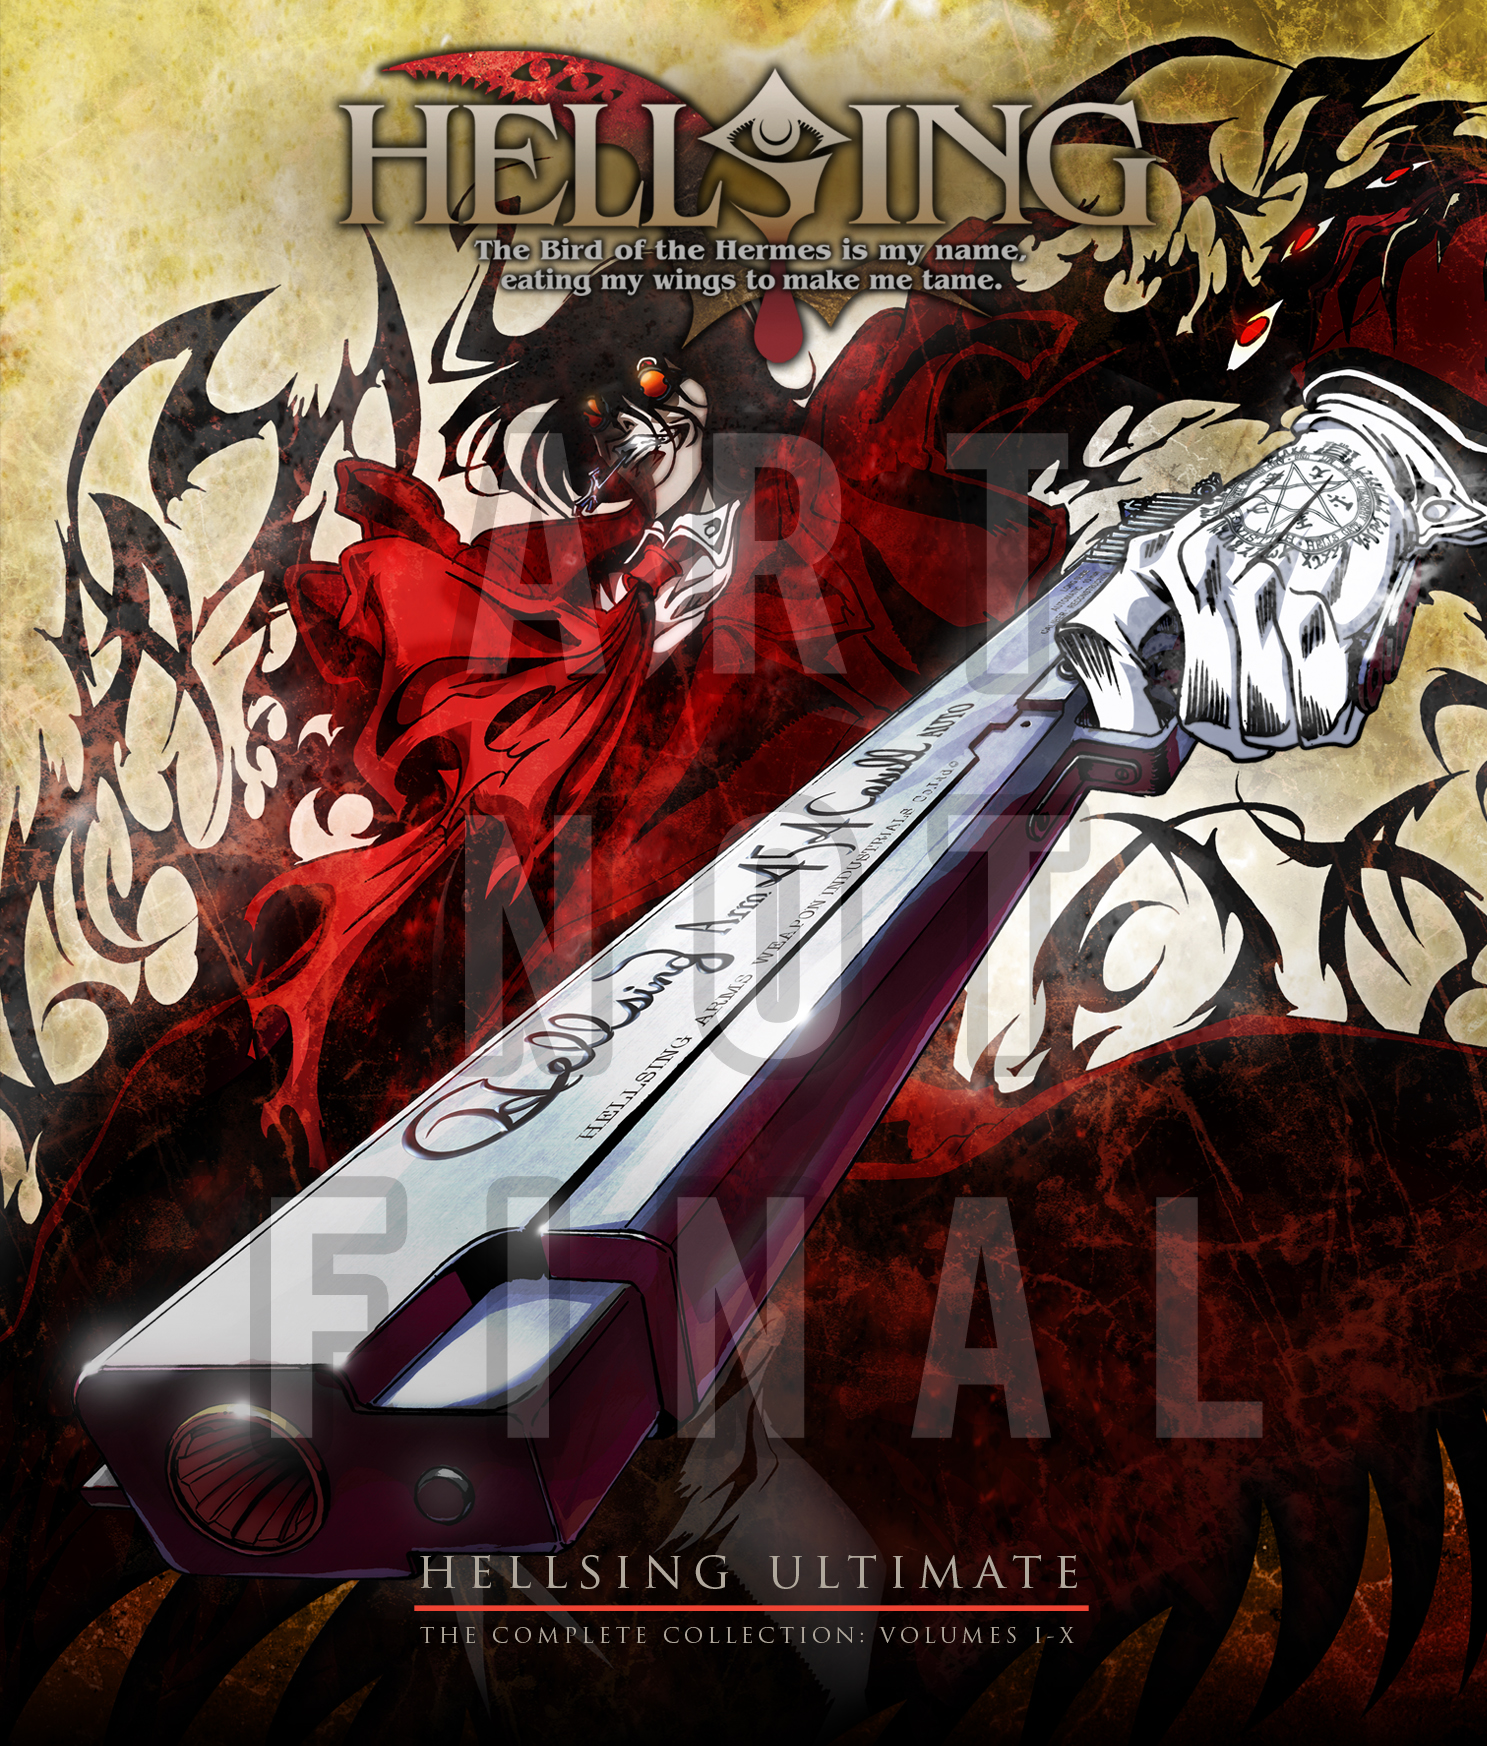 Hellsing Ultimate: The Complete Collection Volumes I-X [Blu-ray